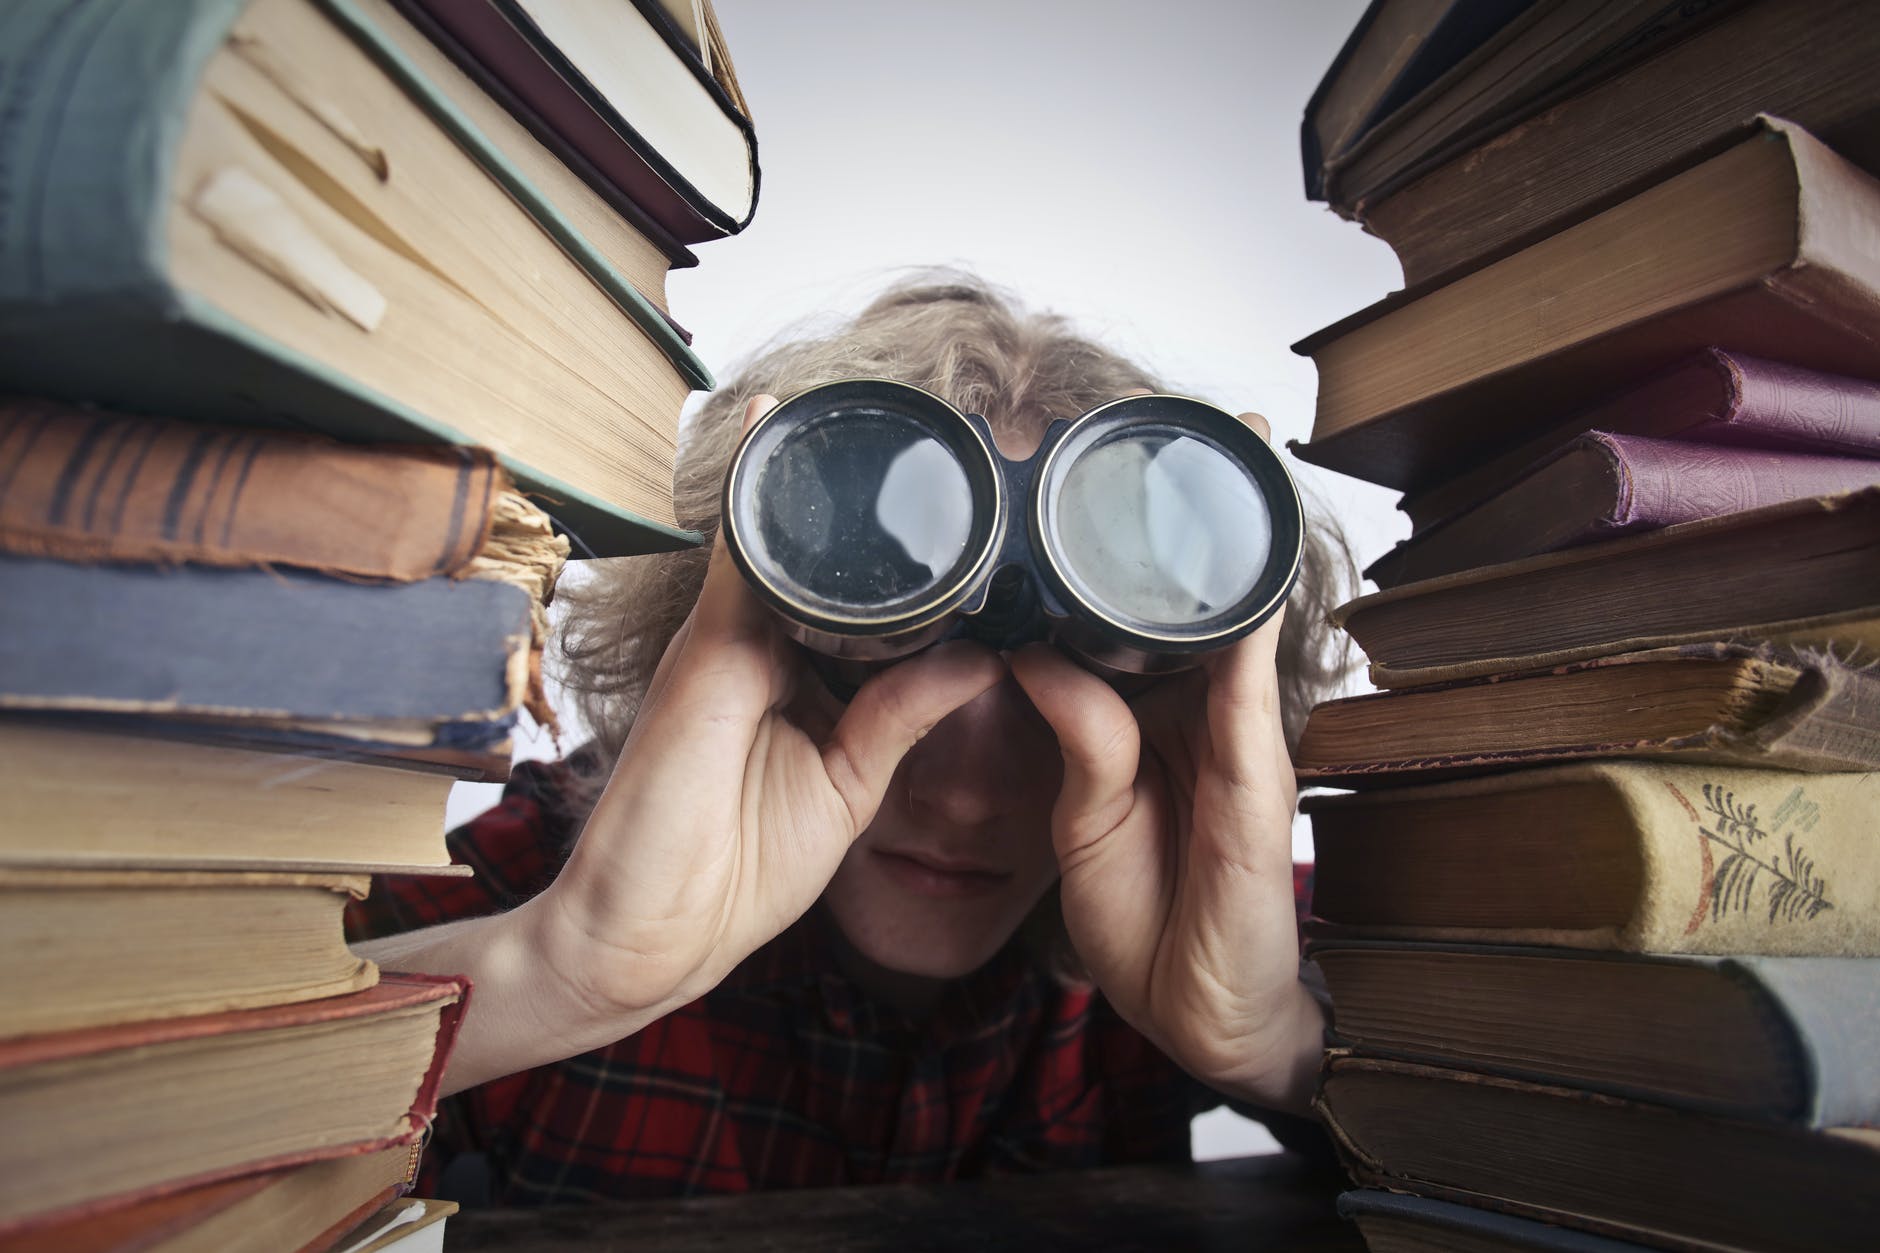 person with blond hair looking through binoculars between 2 stacks of old books